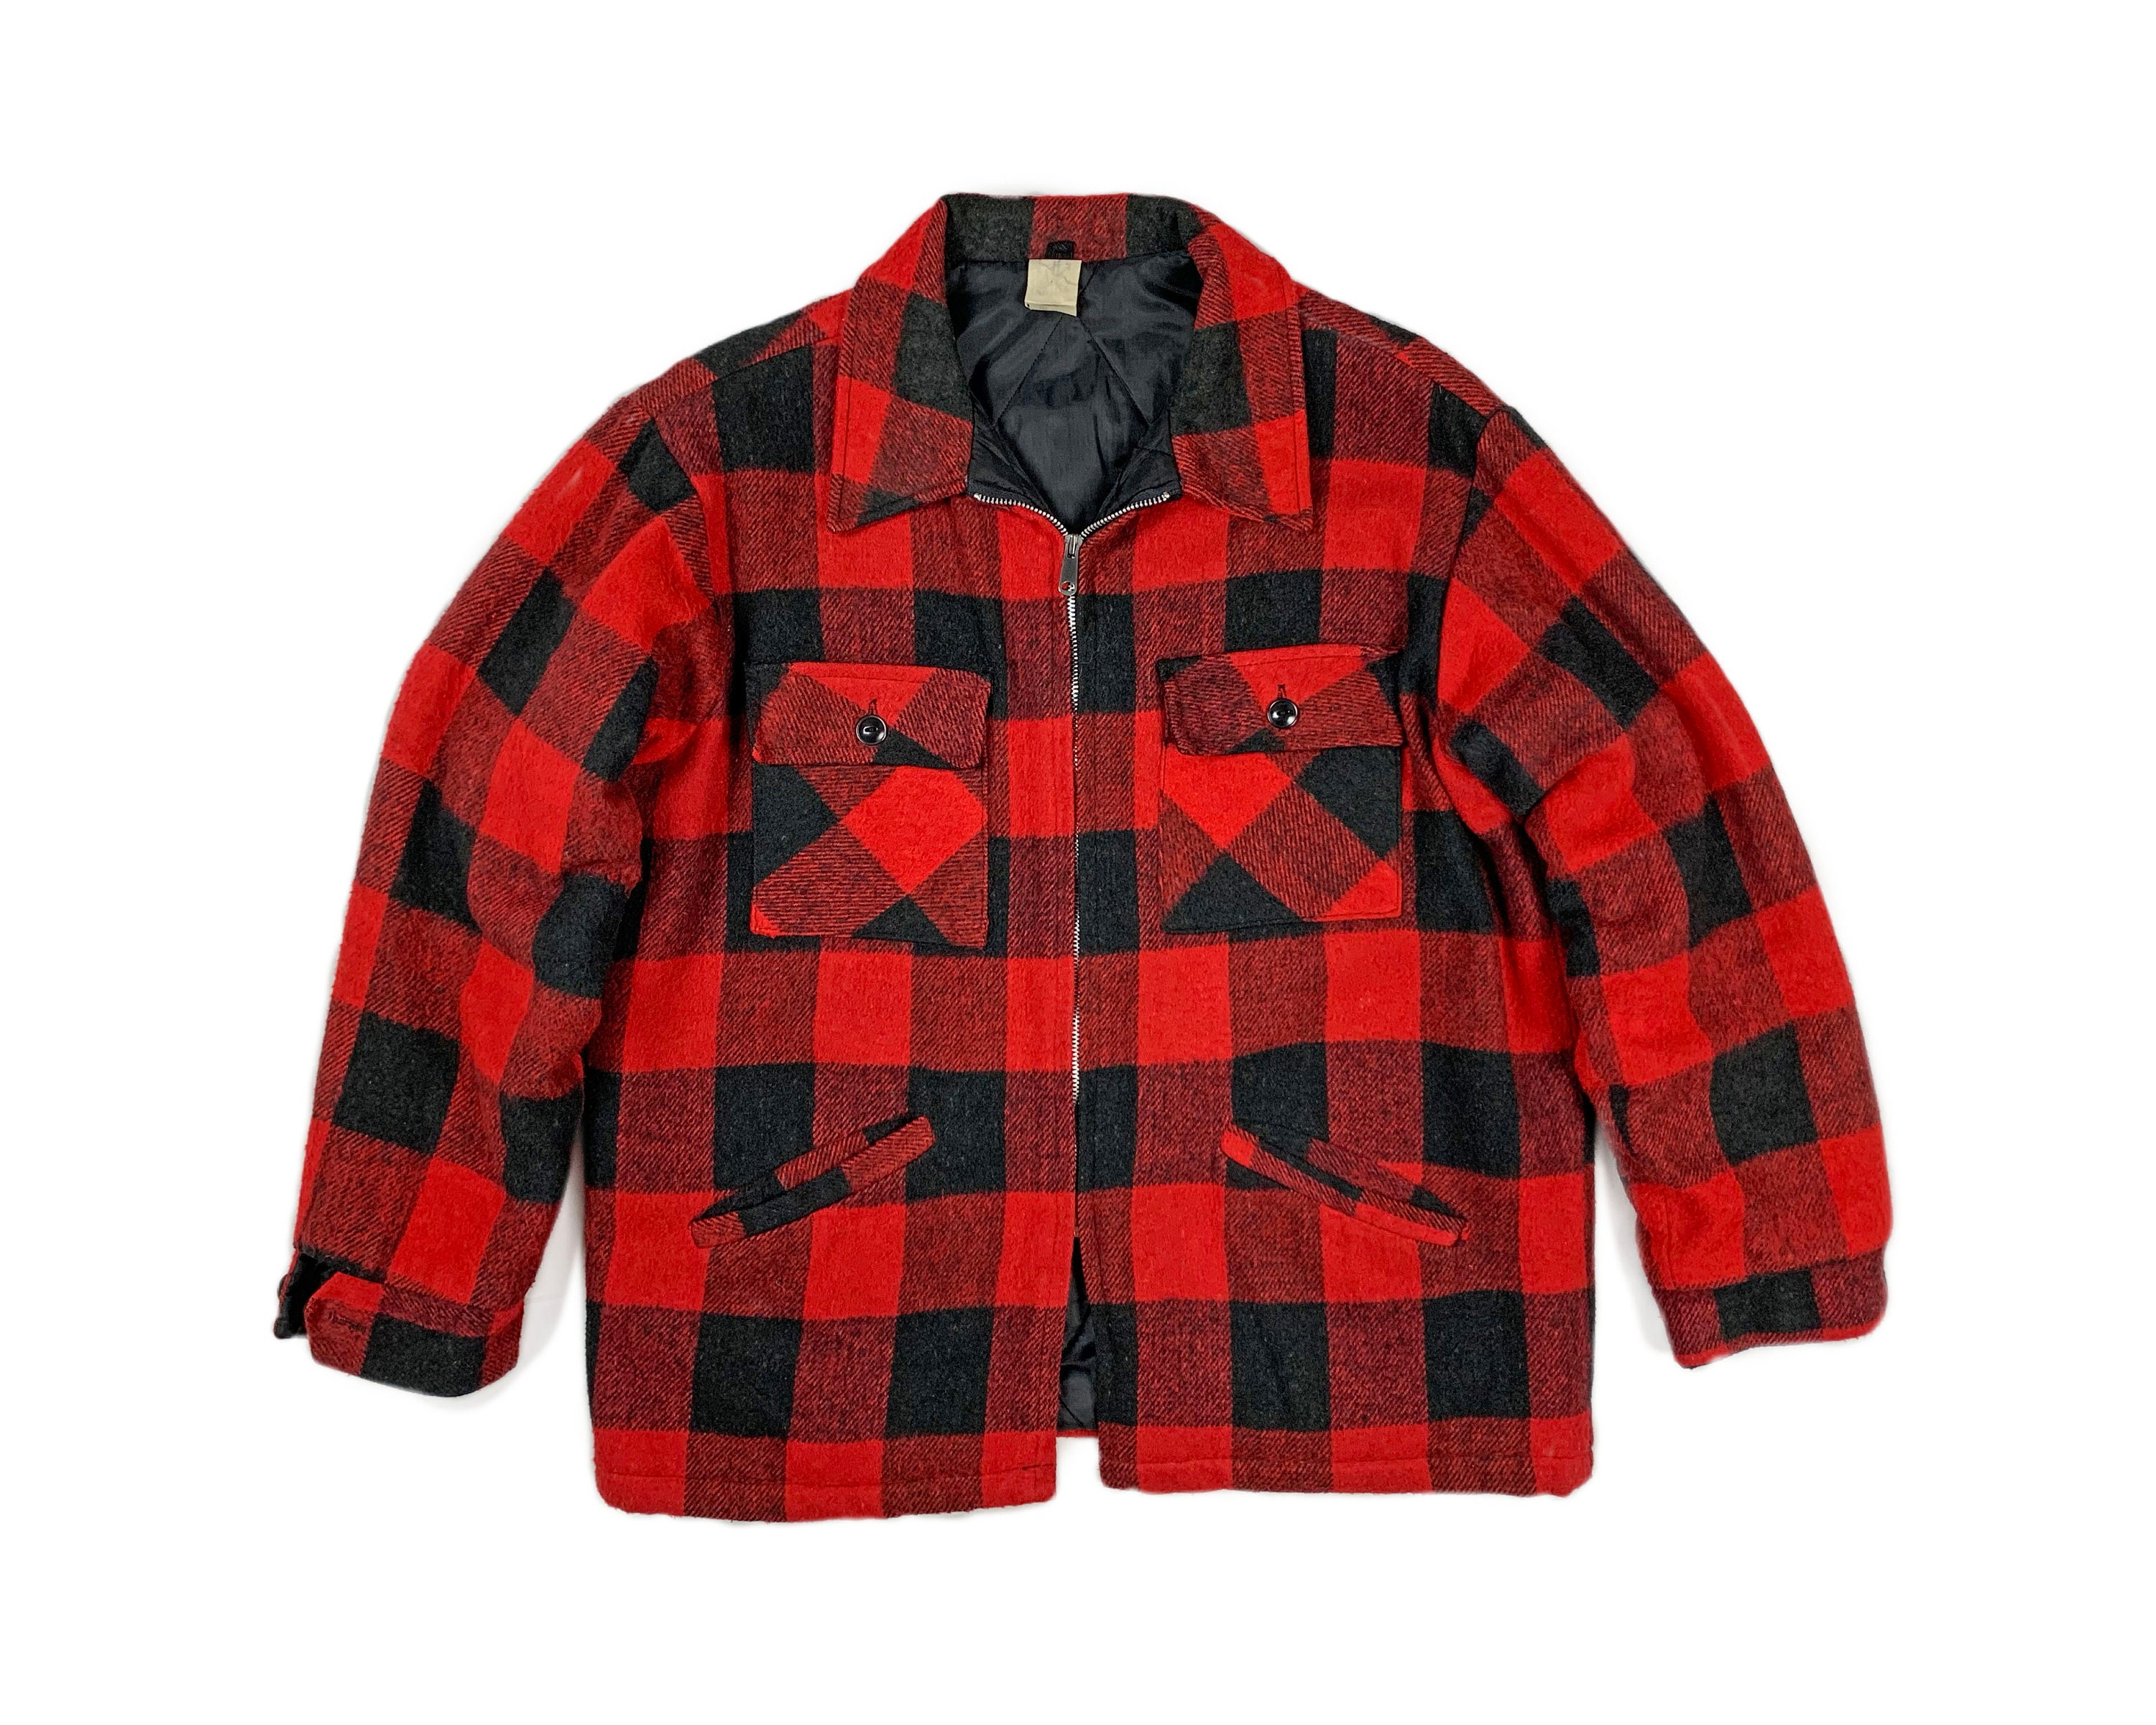 Vintage 1960s Buffalo Plaid Hunting Jacket / Mens Camp Outerwear Winter ...